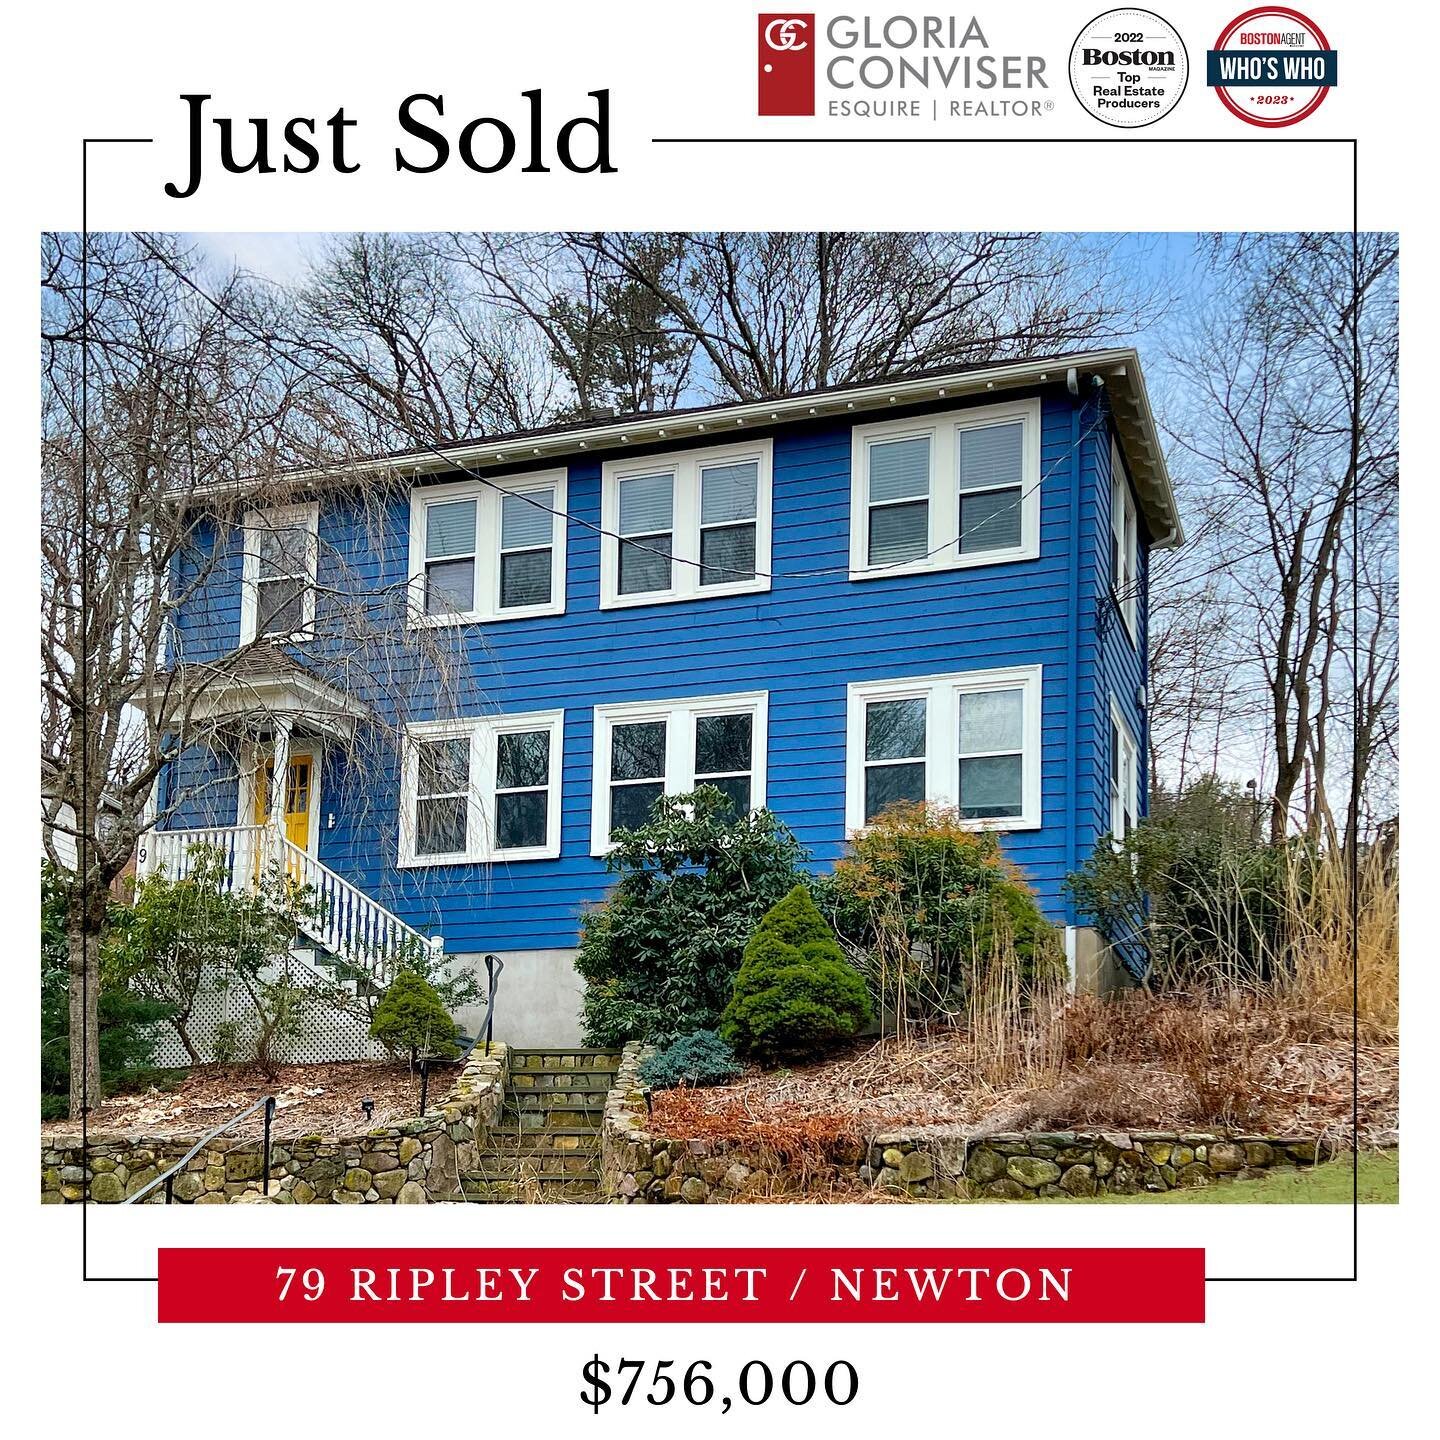 HAPPY CLOSING DAY! 
JUST SOLD ✨

Congratulations to my Sellers on the sale of this lovely Newton condo! Congrats to the buyers and welcome to Newton.

79 Ripley Street Newton 

Contact me @gloriaconviser to help in this competitive market! www.Gloria